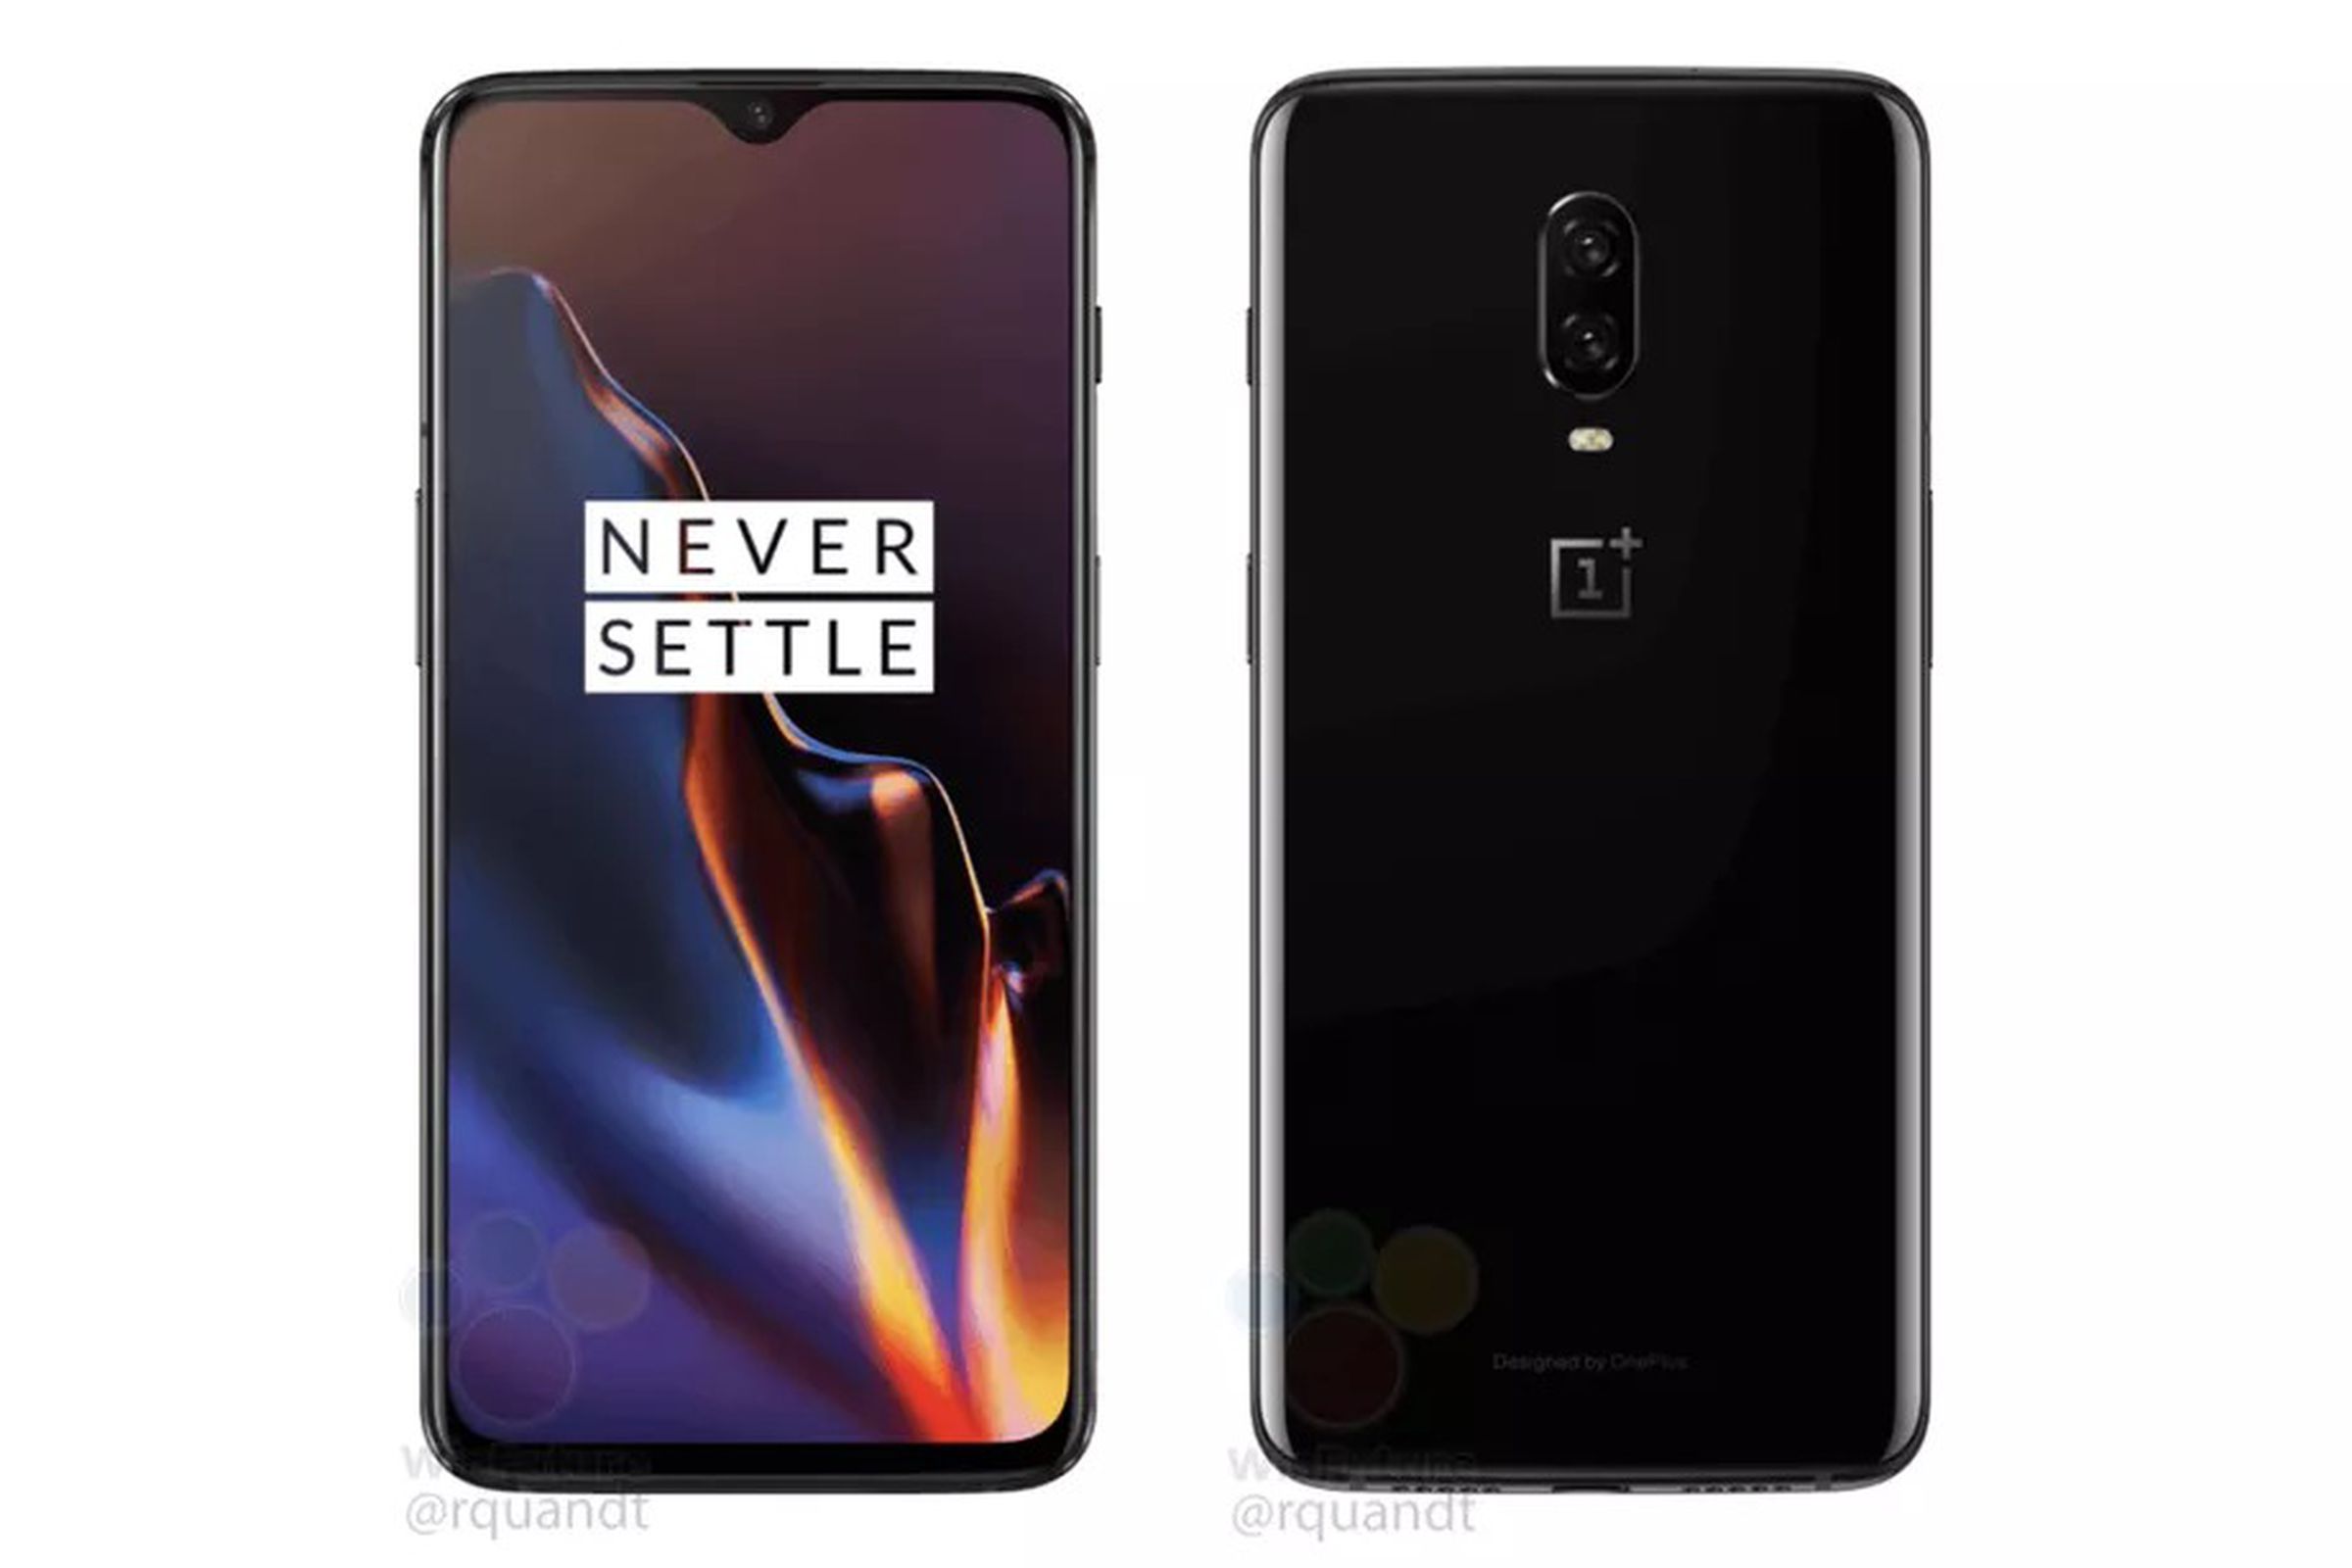 Leaked images of the OnePlus 6T.